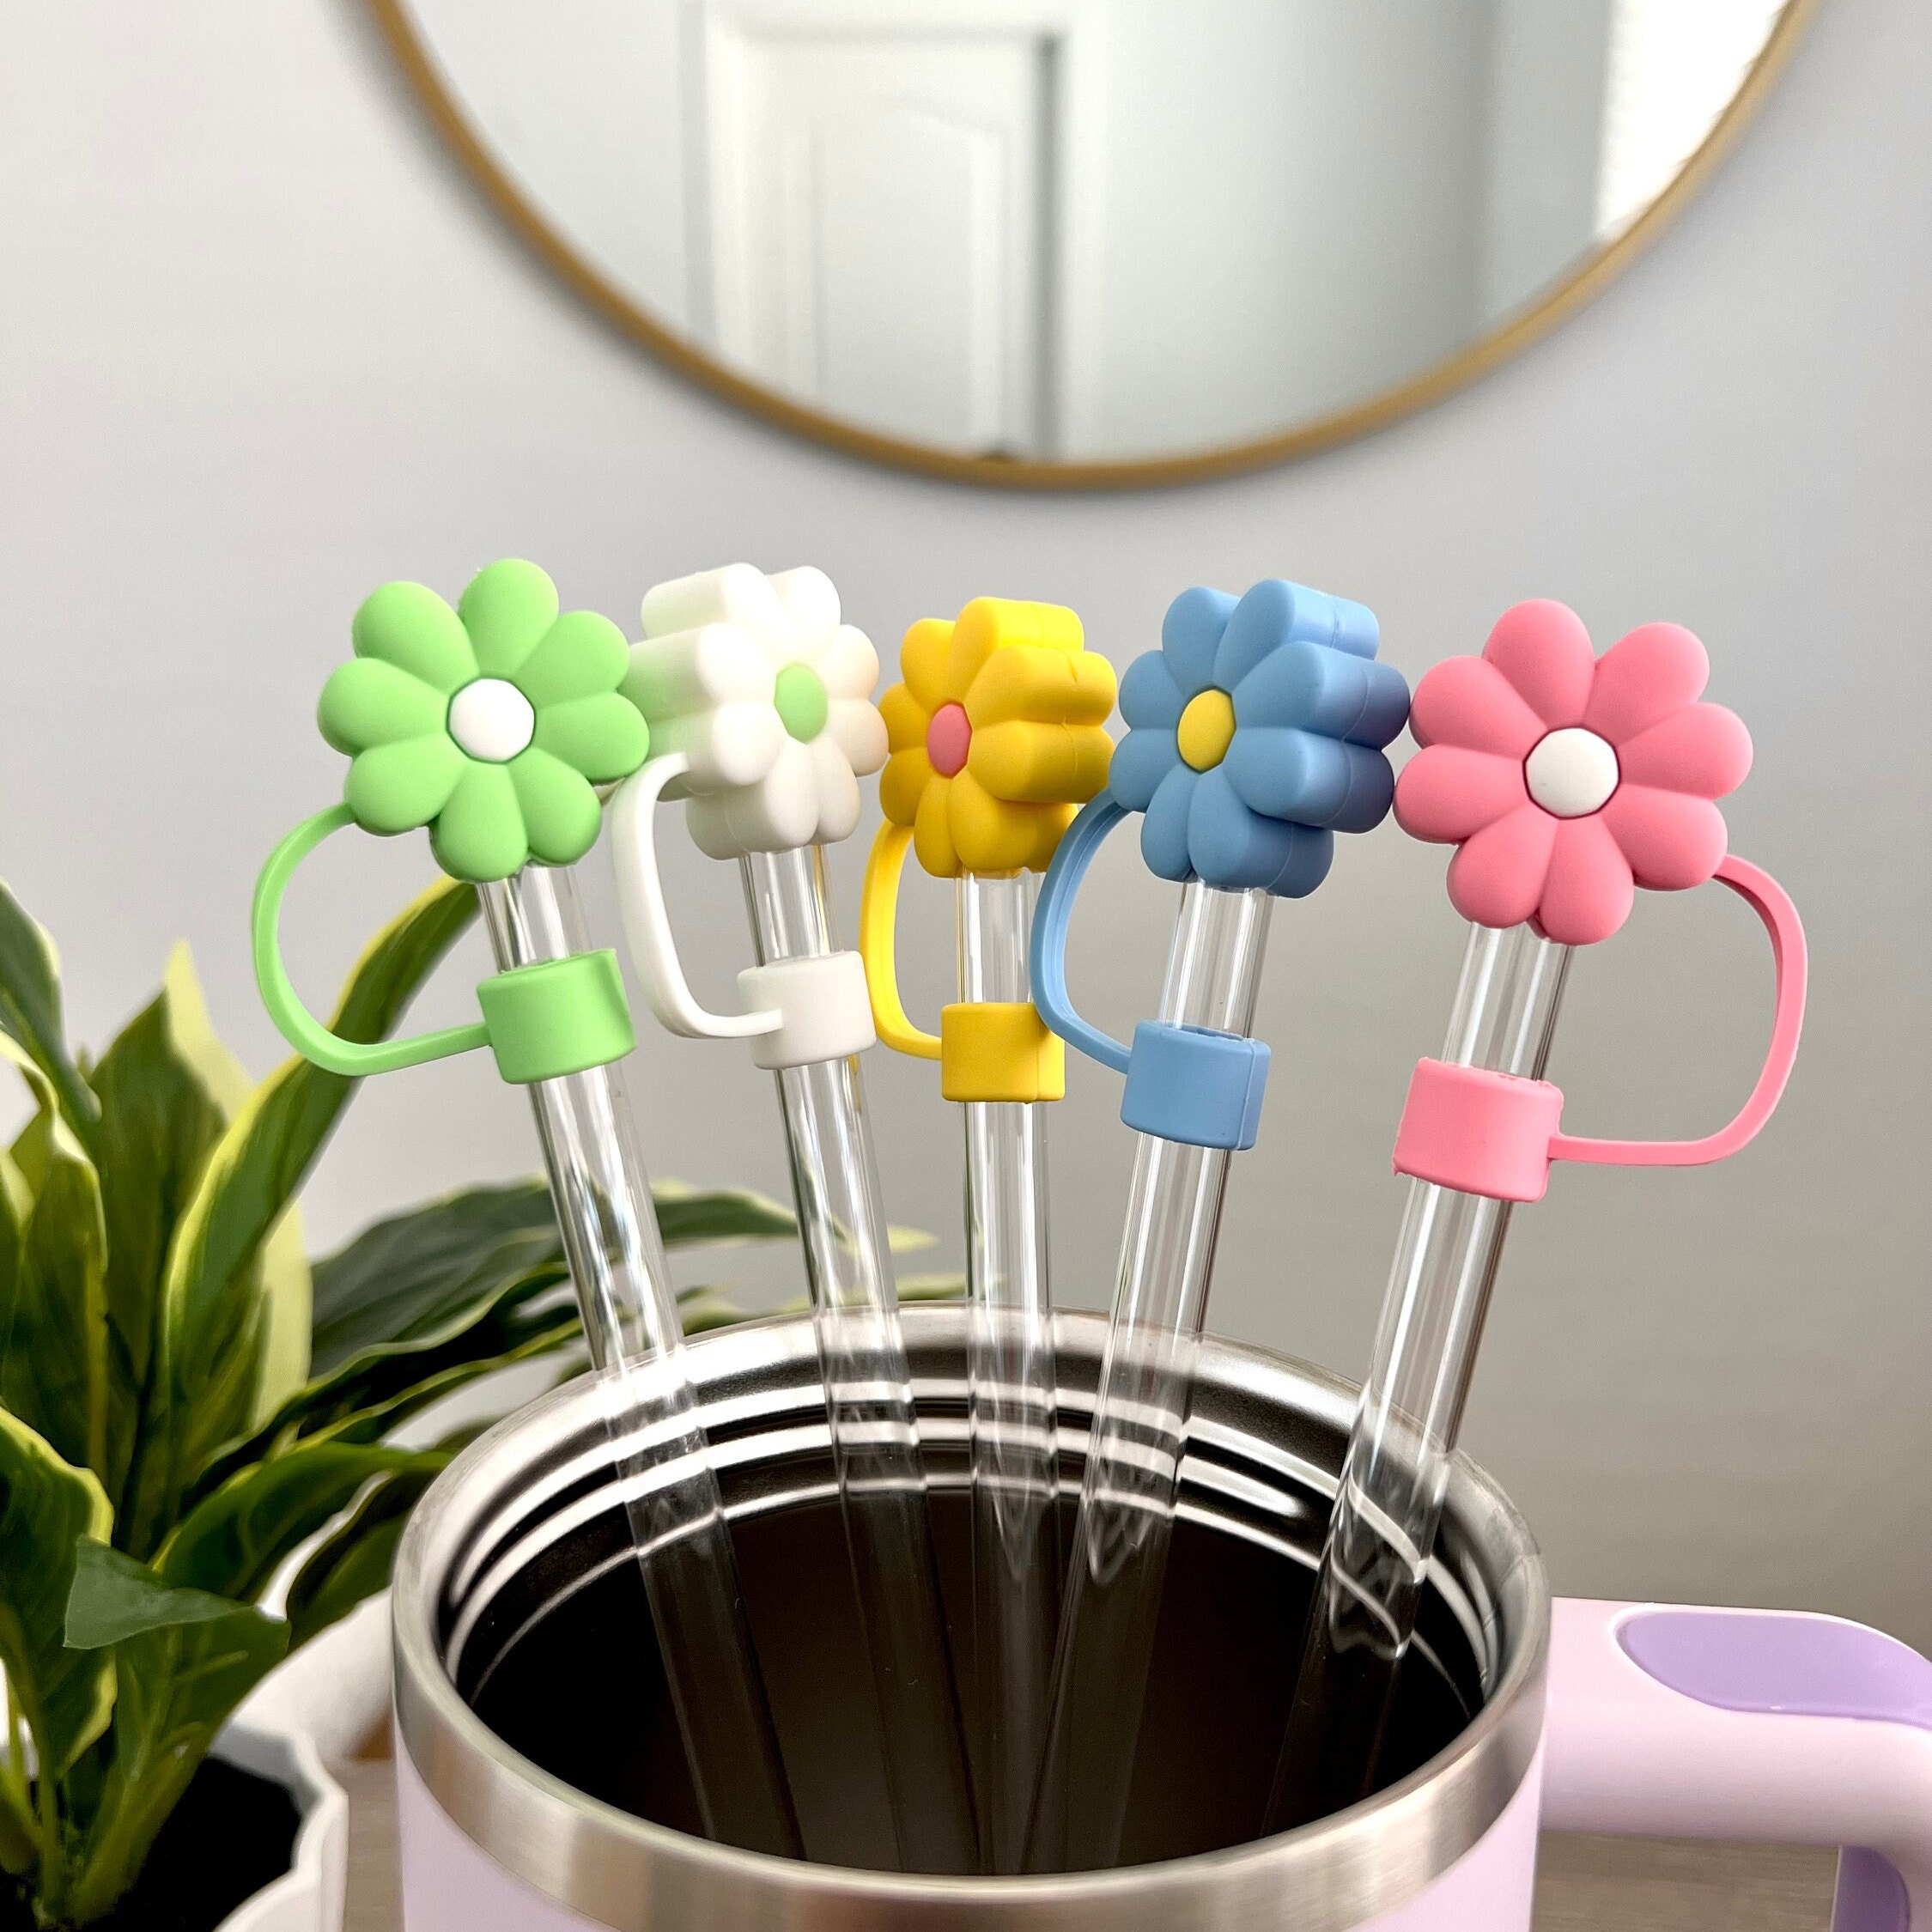 stanley cup straw cover flower｜TikTok Search